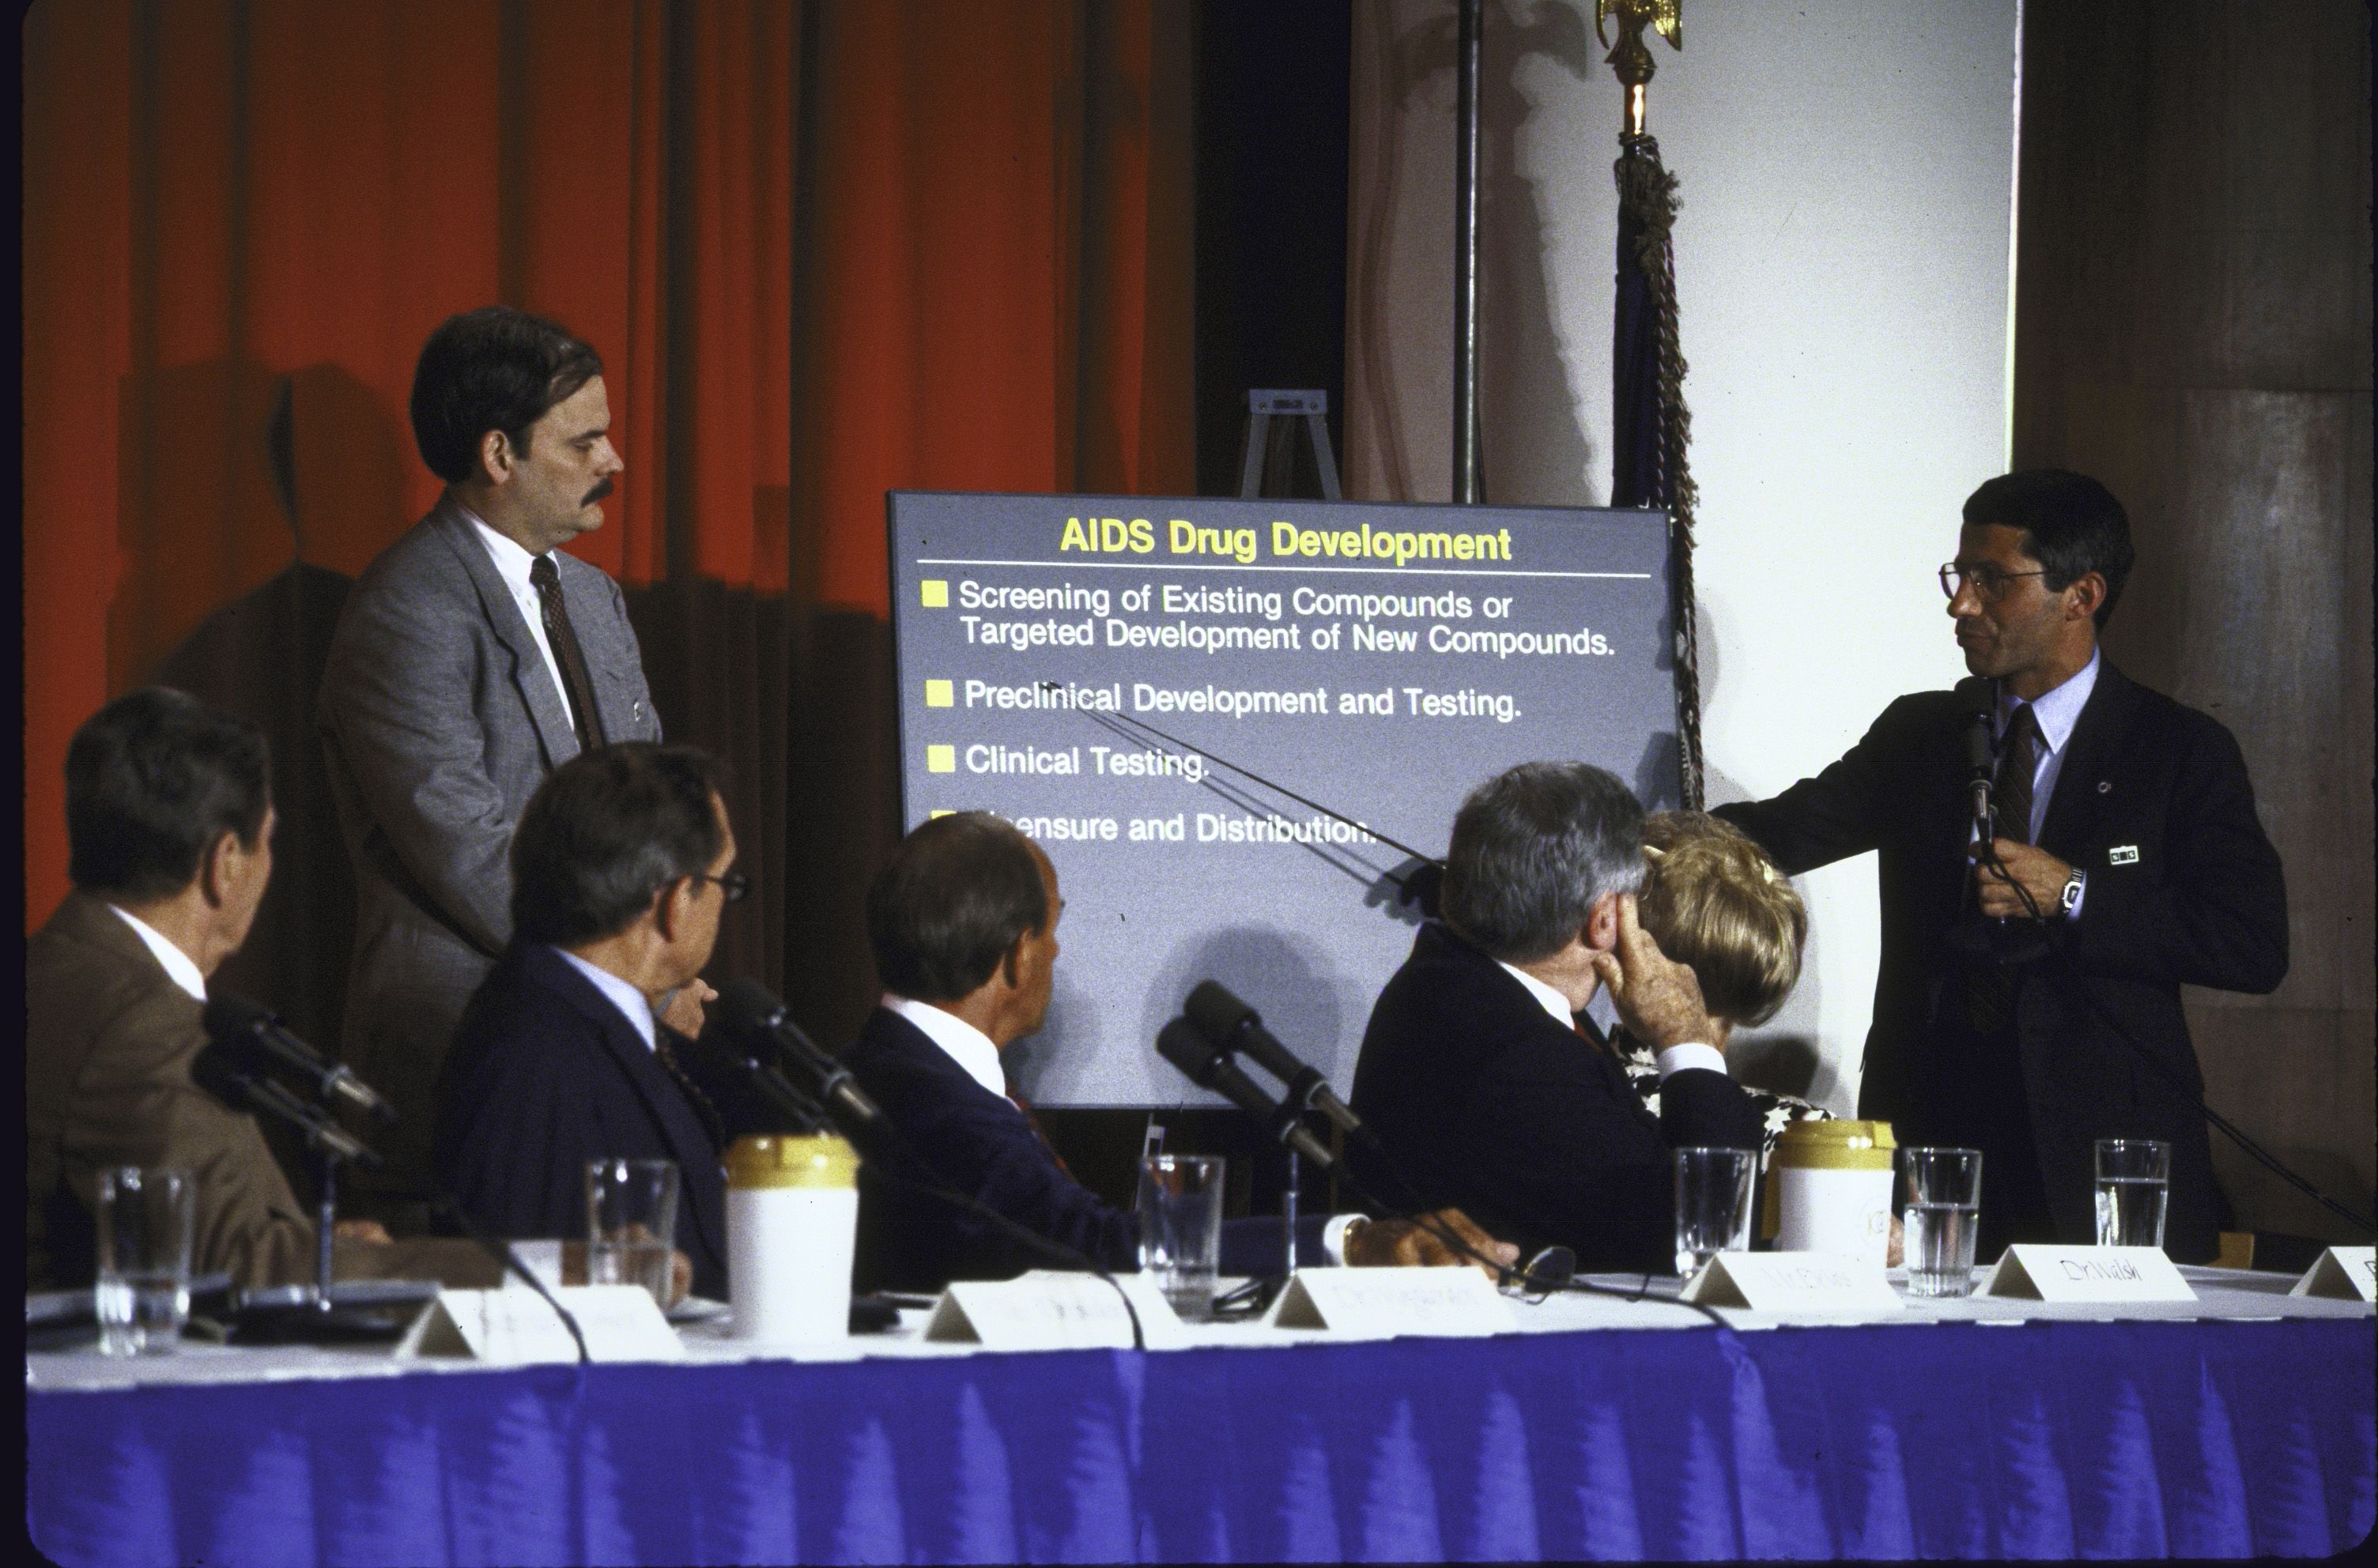 Fauci presenting on AIDS